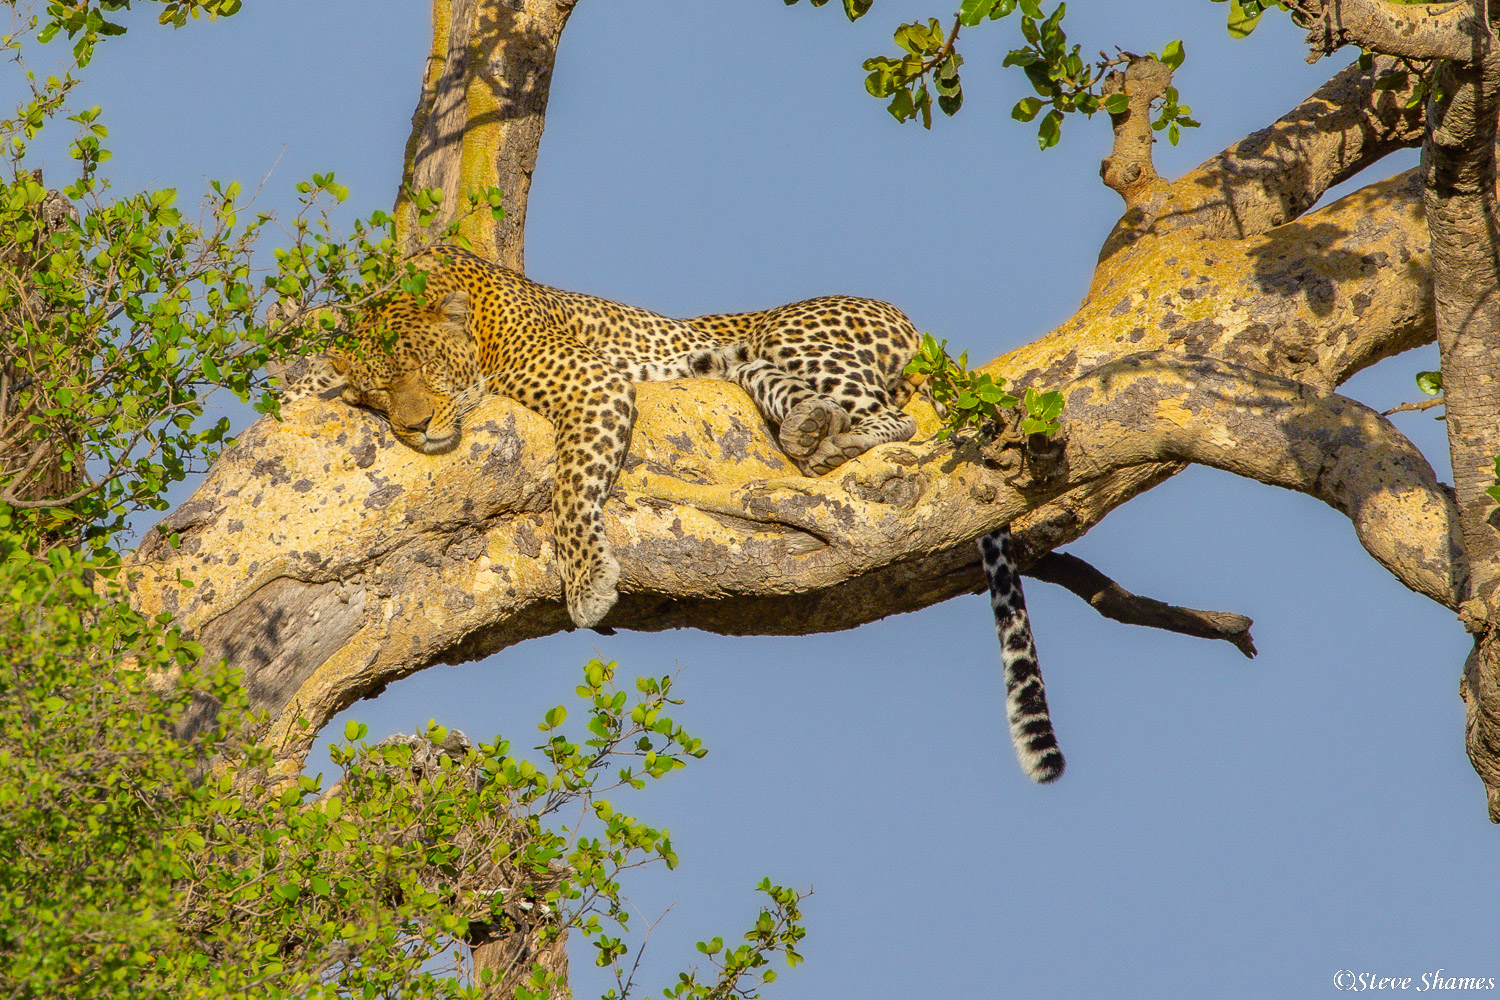 Leopard up in a tree taking a cat nap. This one looks very comfortable.